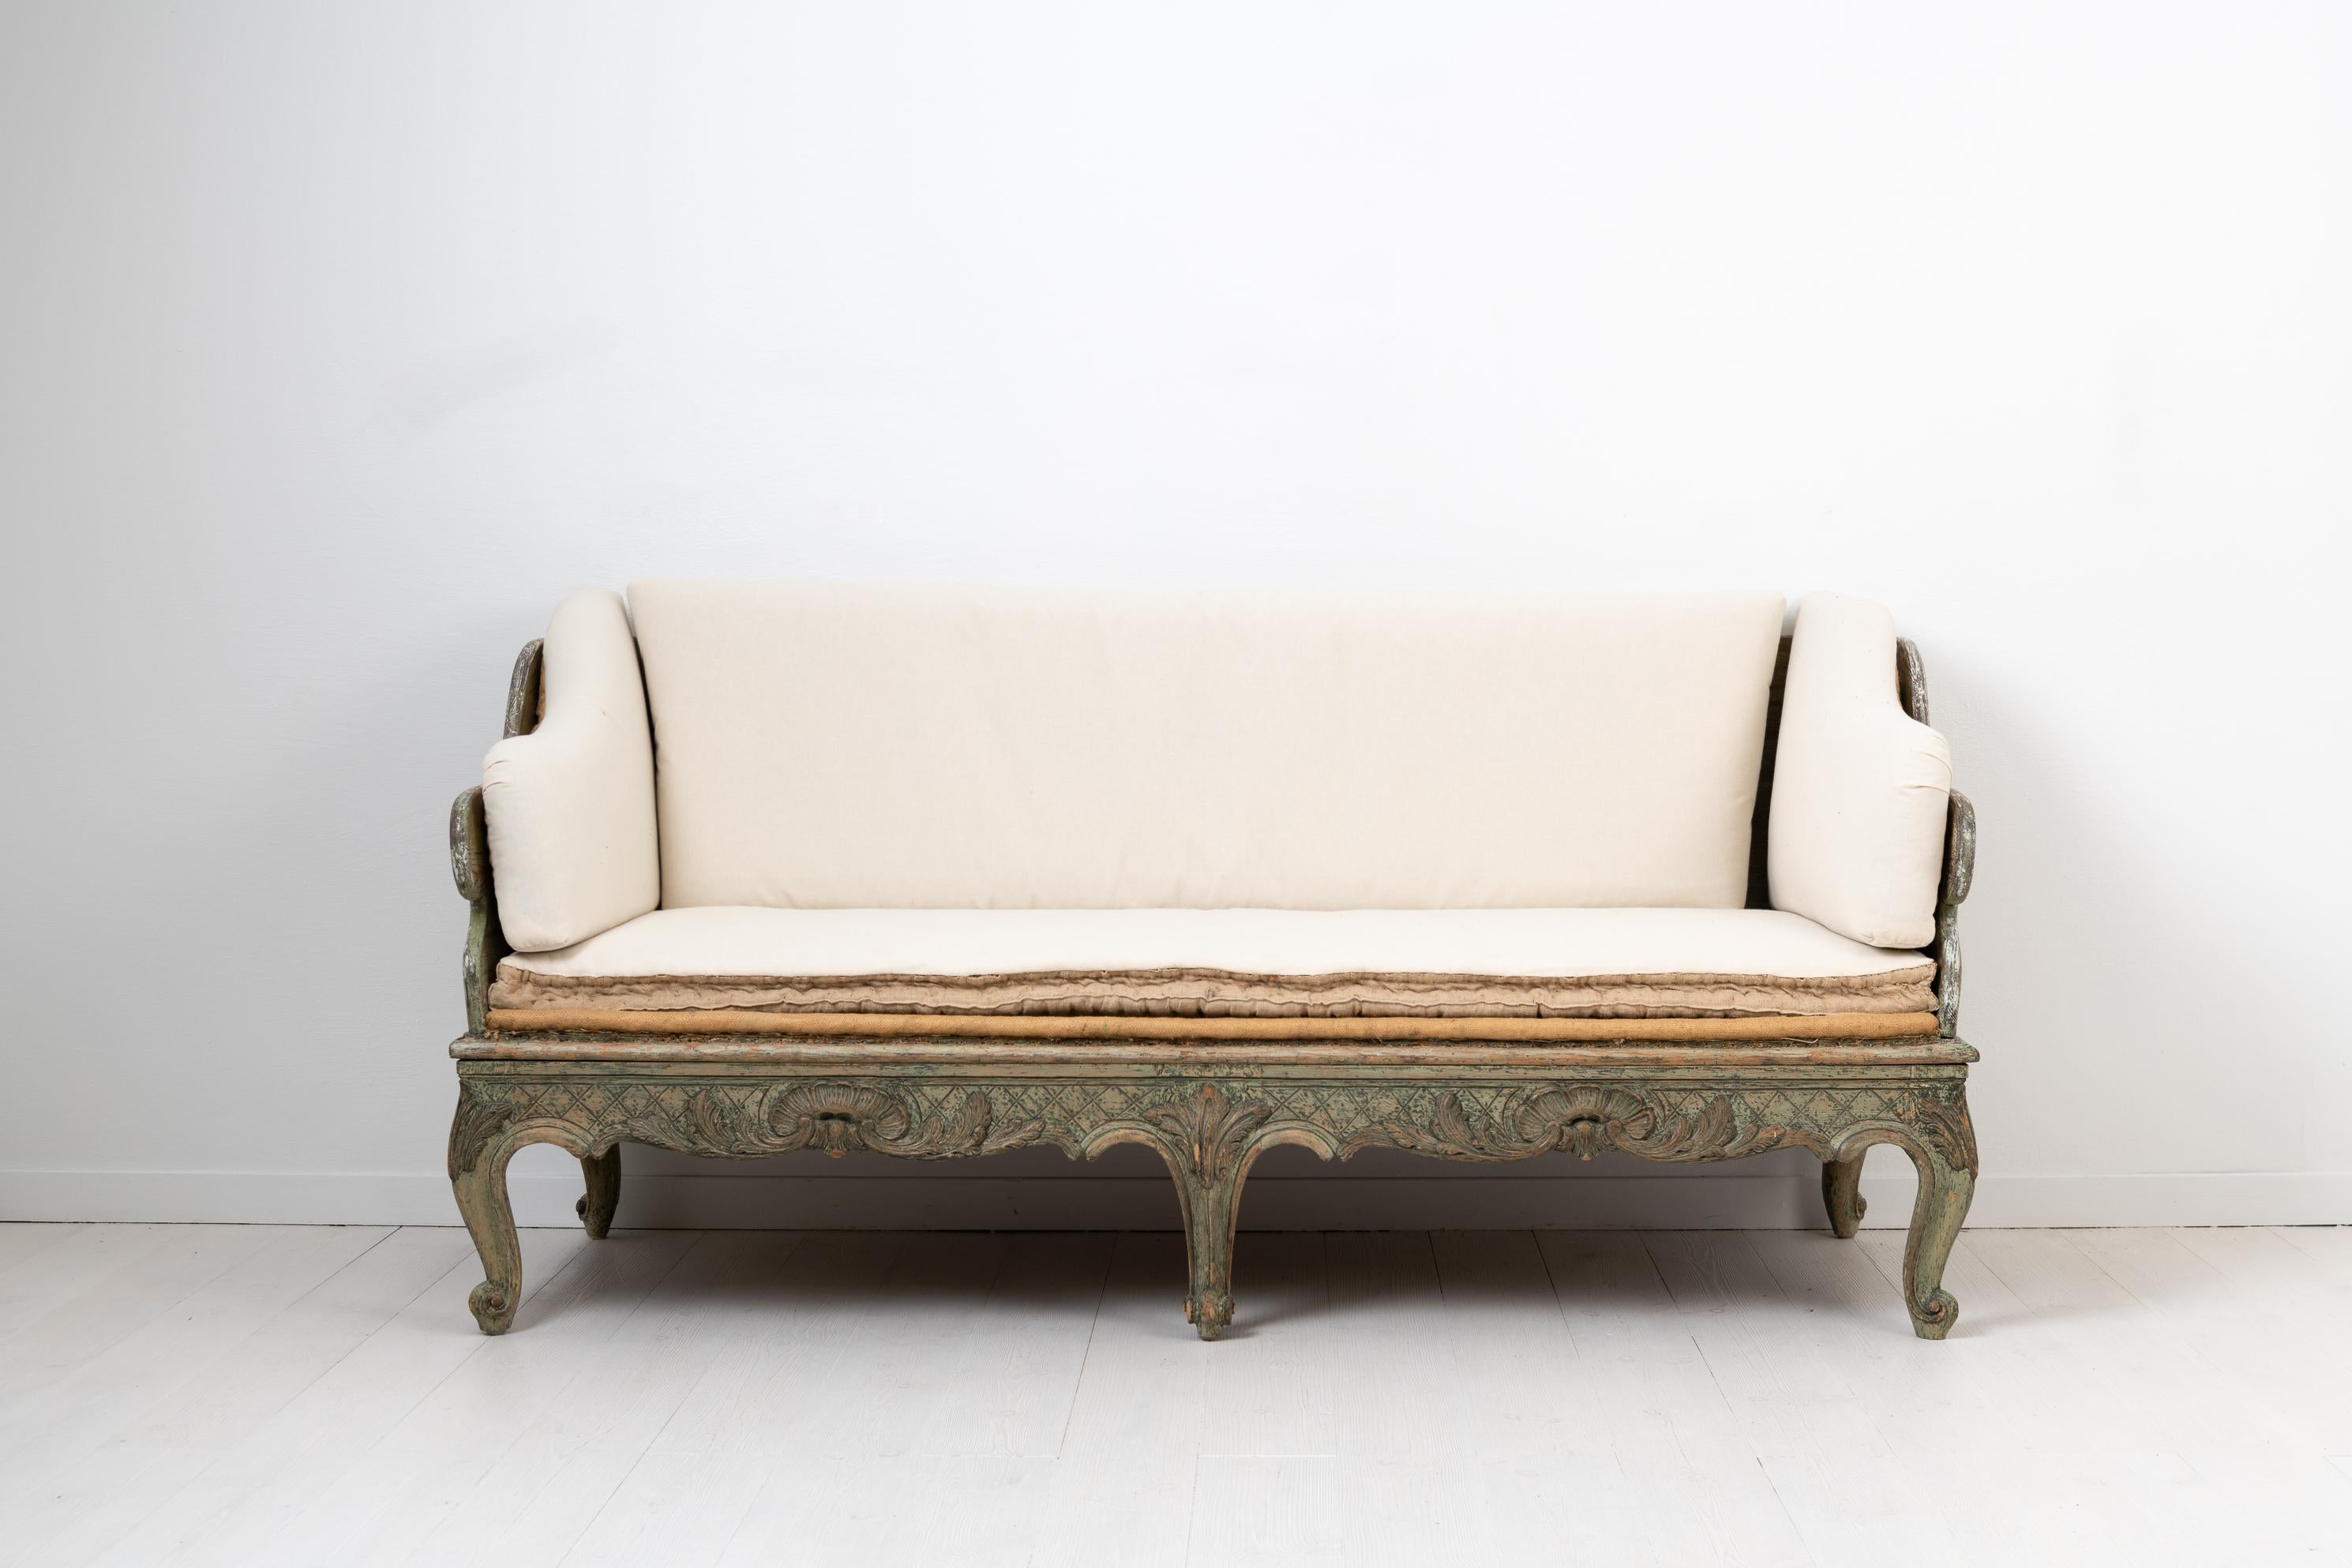 Hand-Crafted 18th Century Swedish Green and White Rococo Sofa